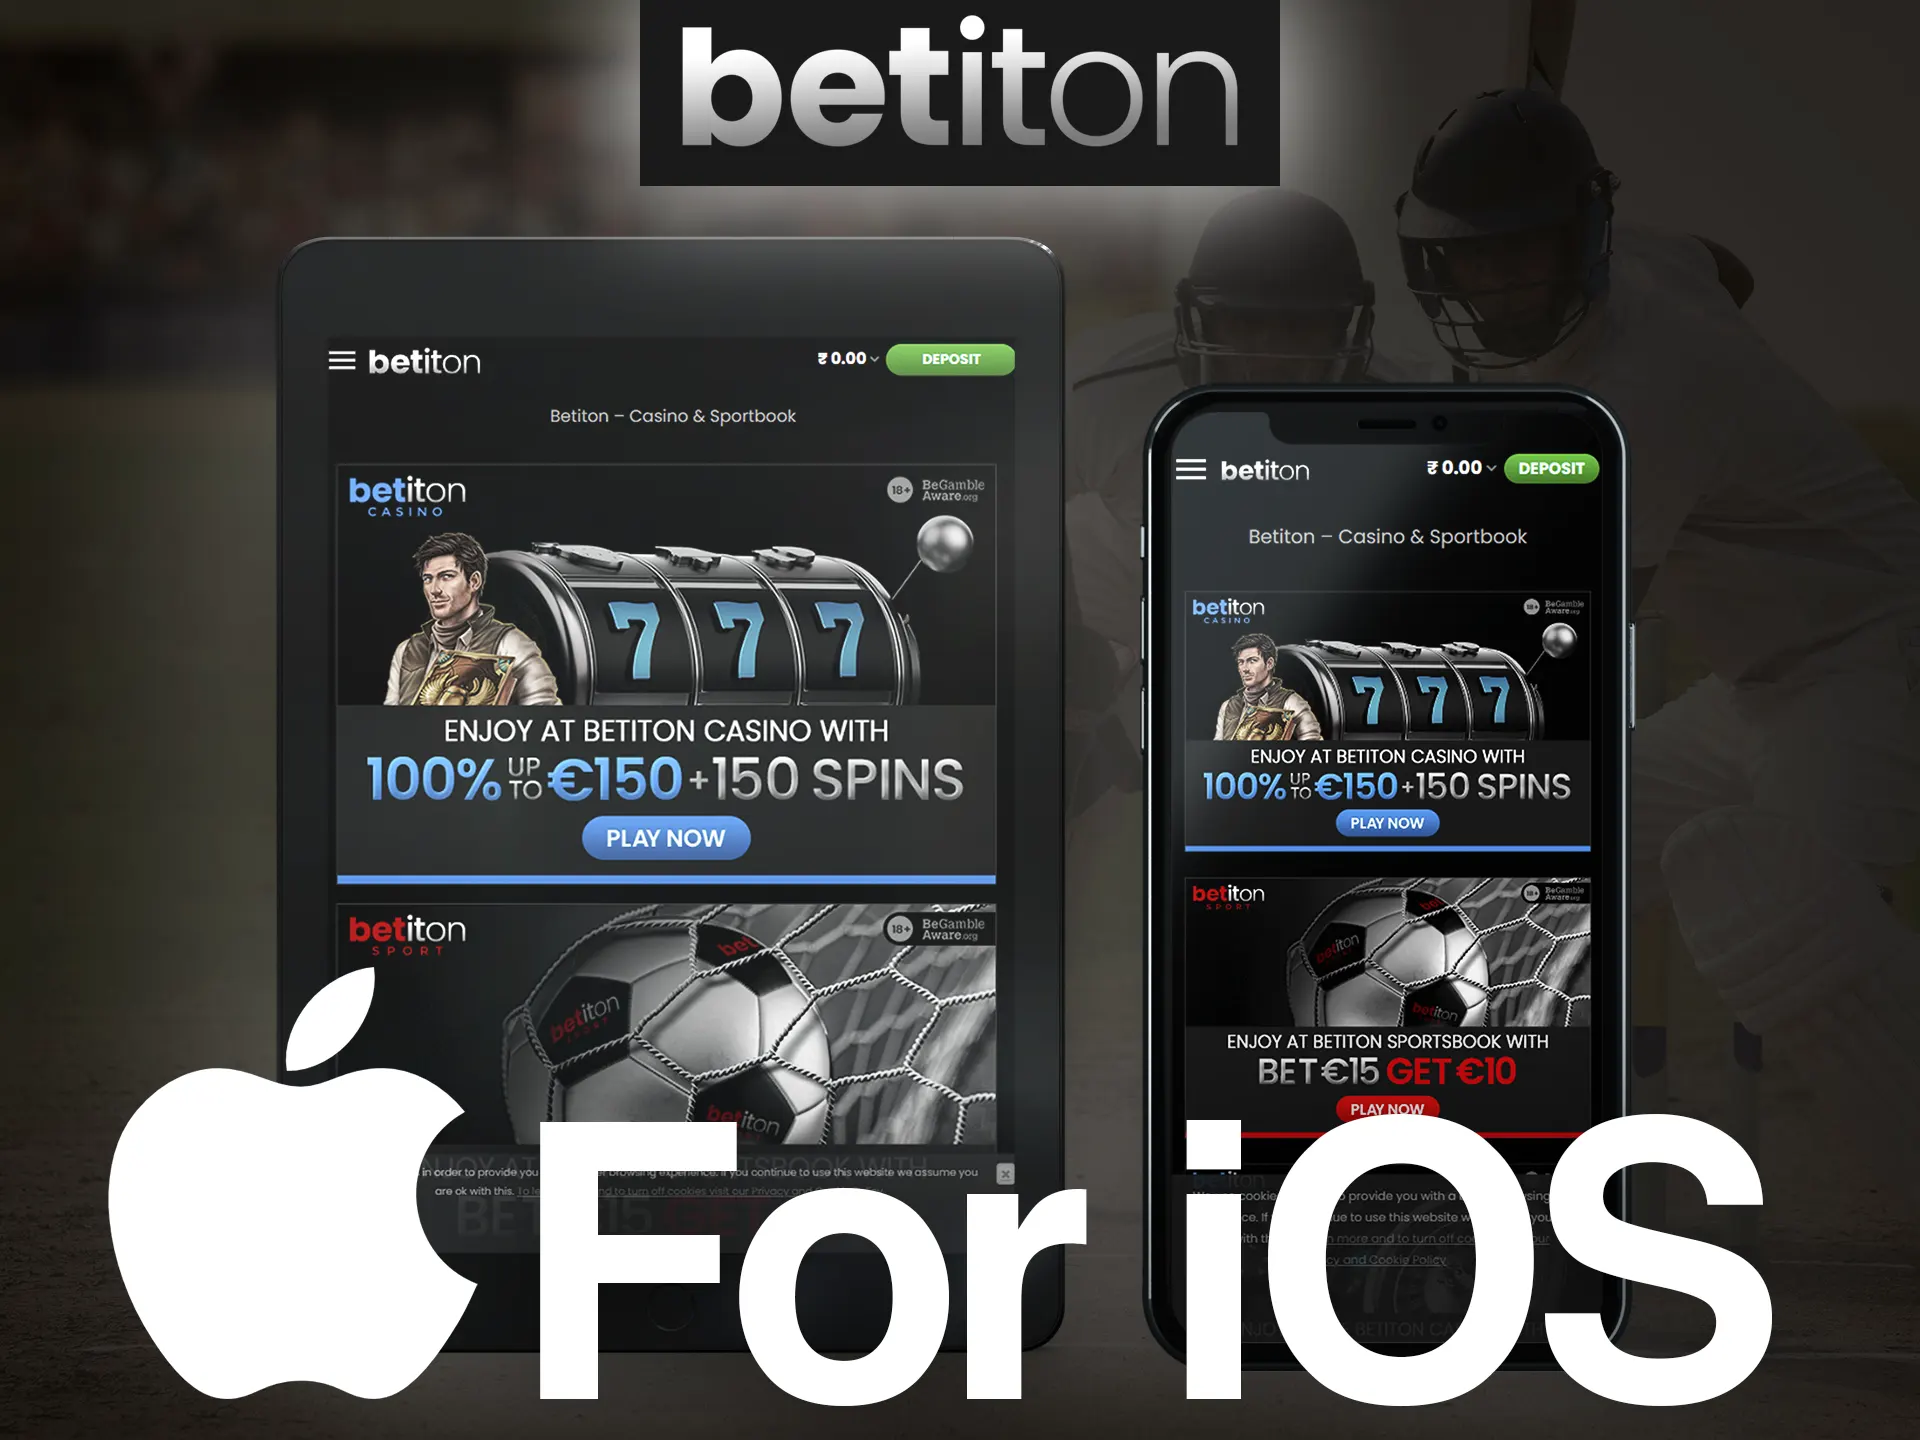 Betiton app can be installed on the iOS devices.